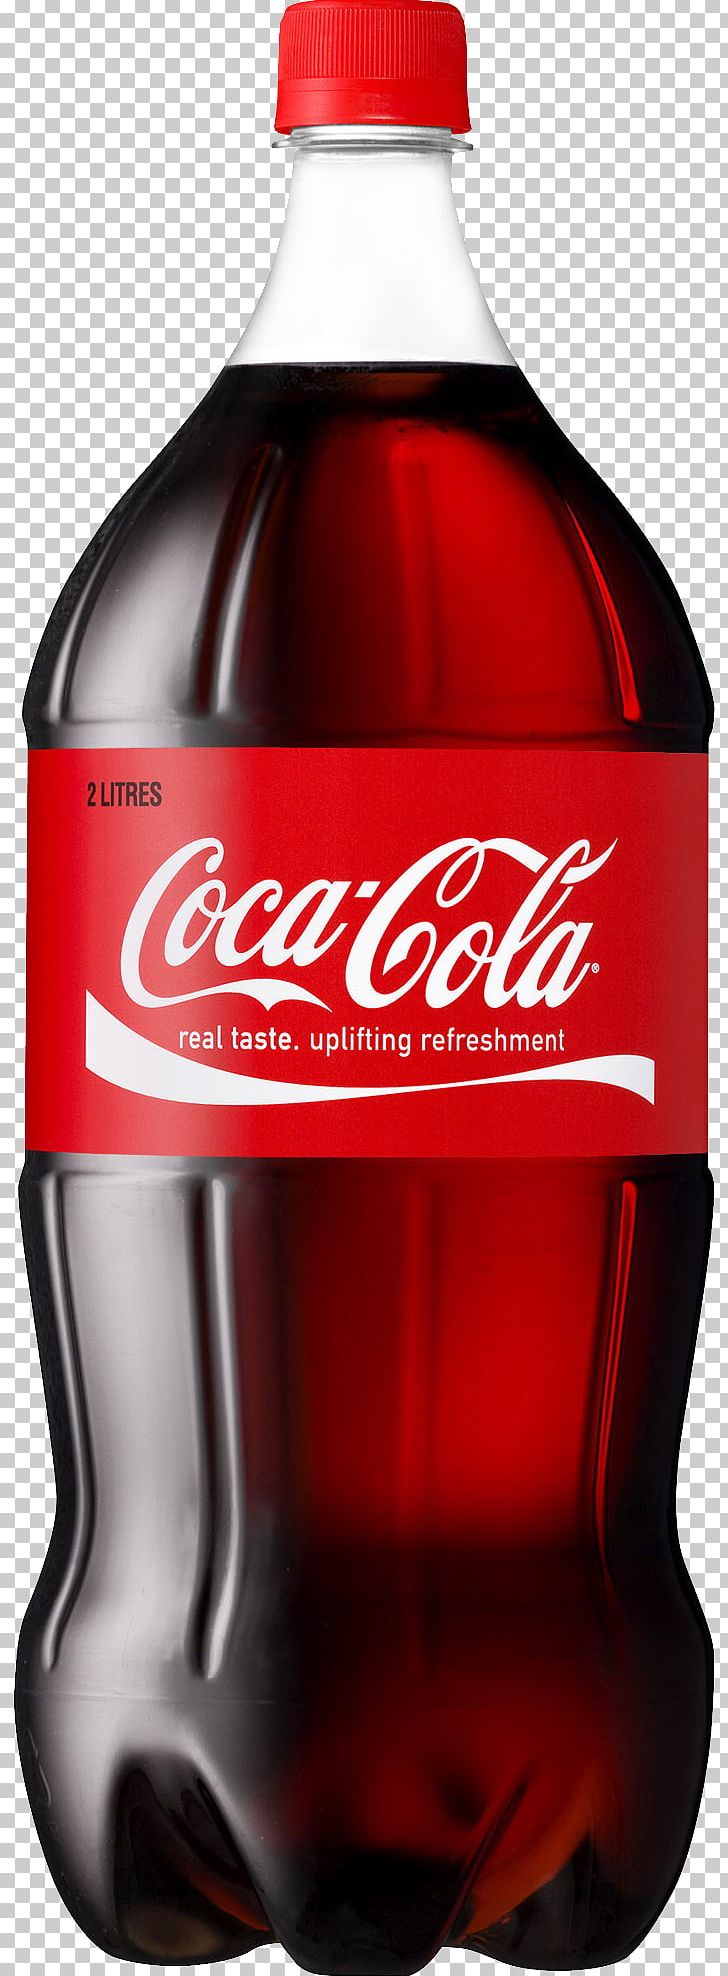 Coca Cola Bottle PNG, Clipart, Beverage Can, Bottle, Carbonated Soft Drinks, Coca, Coca Cola Bottle Free PNG Download